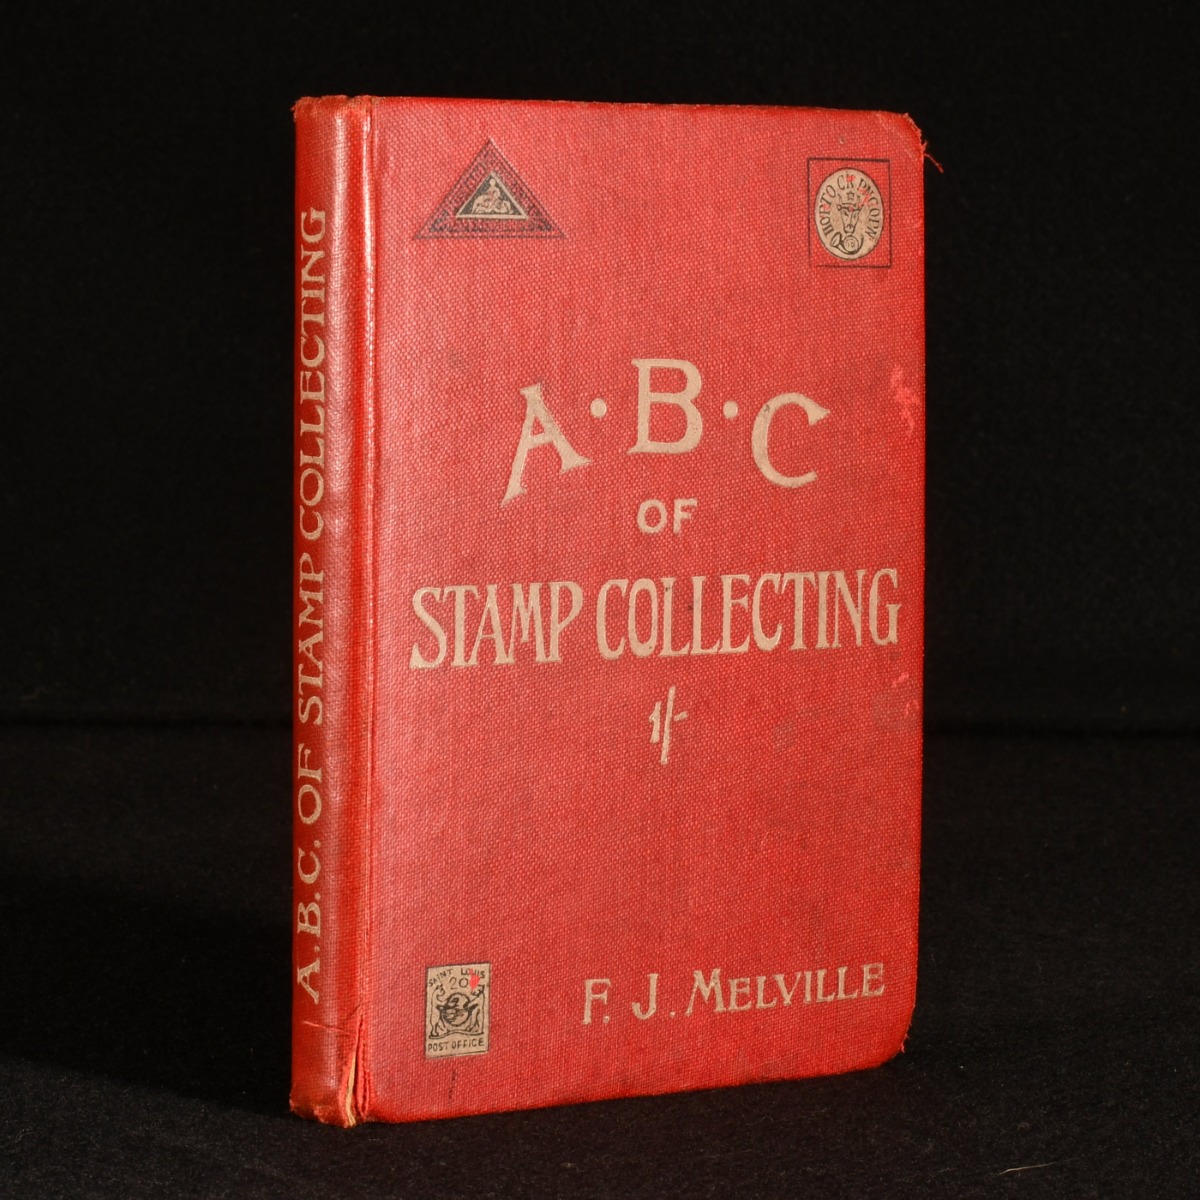 Guide to Stamp Collecting